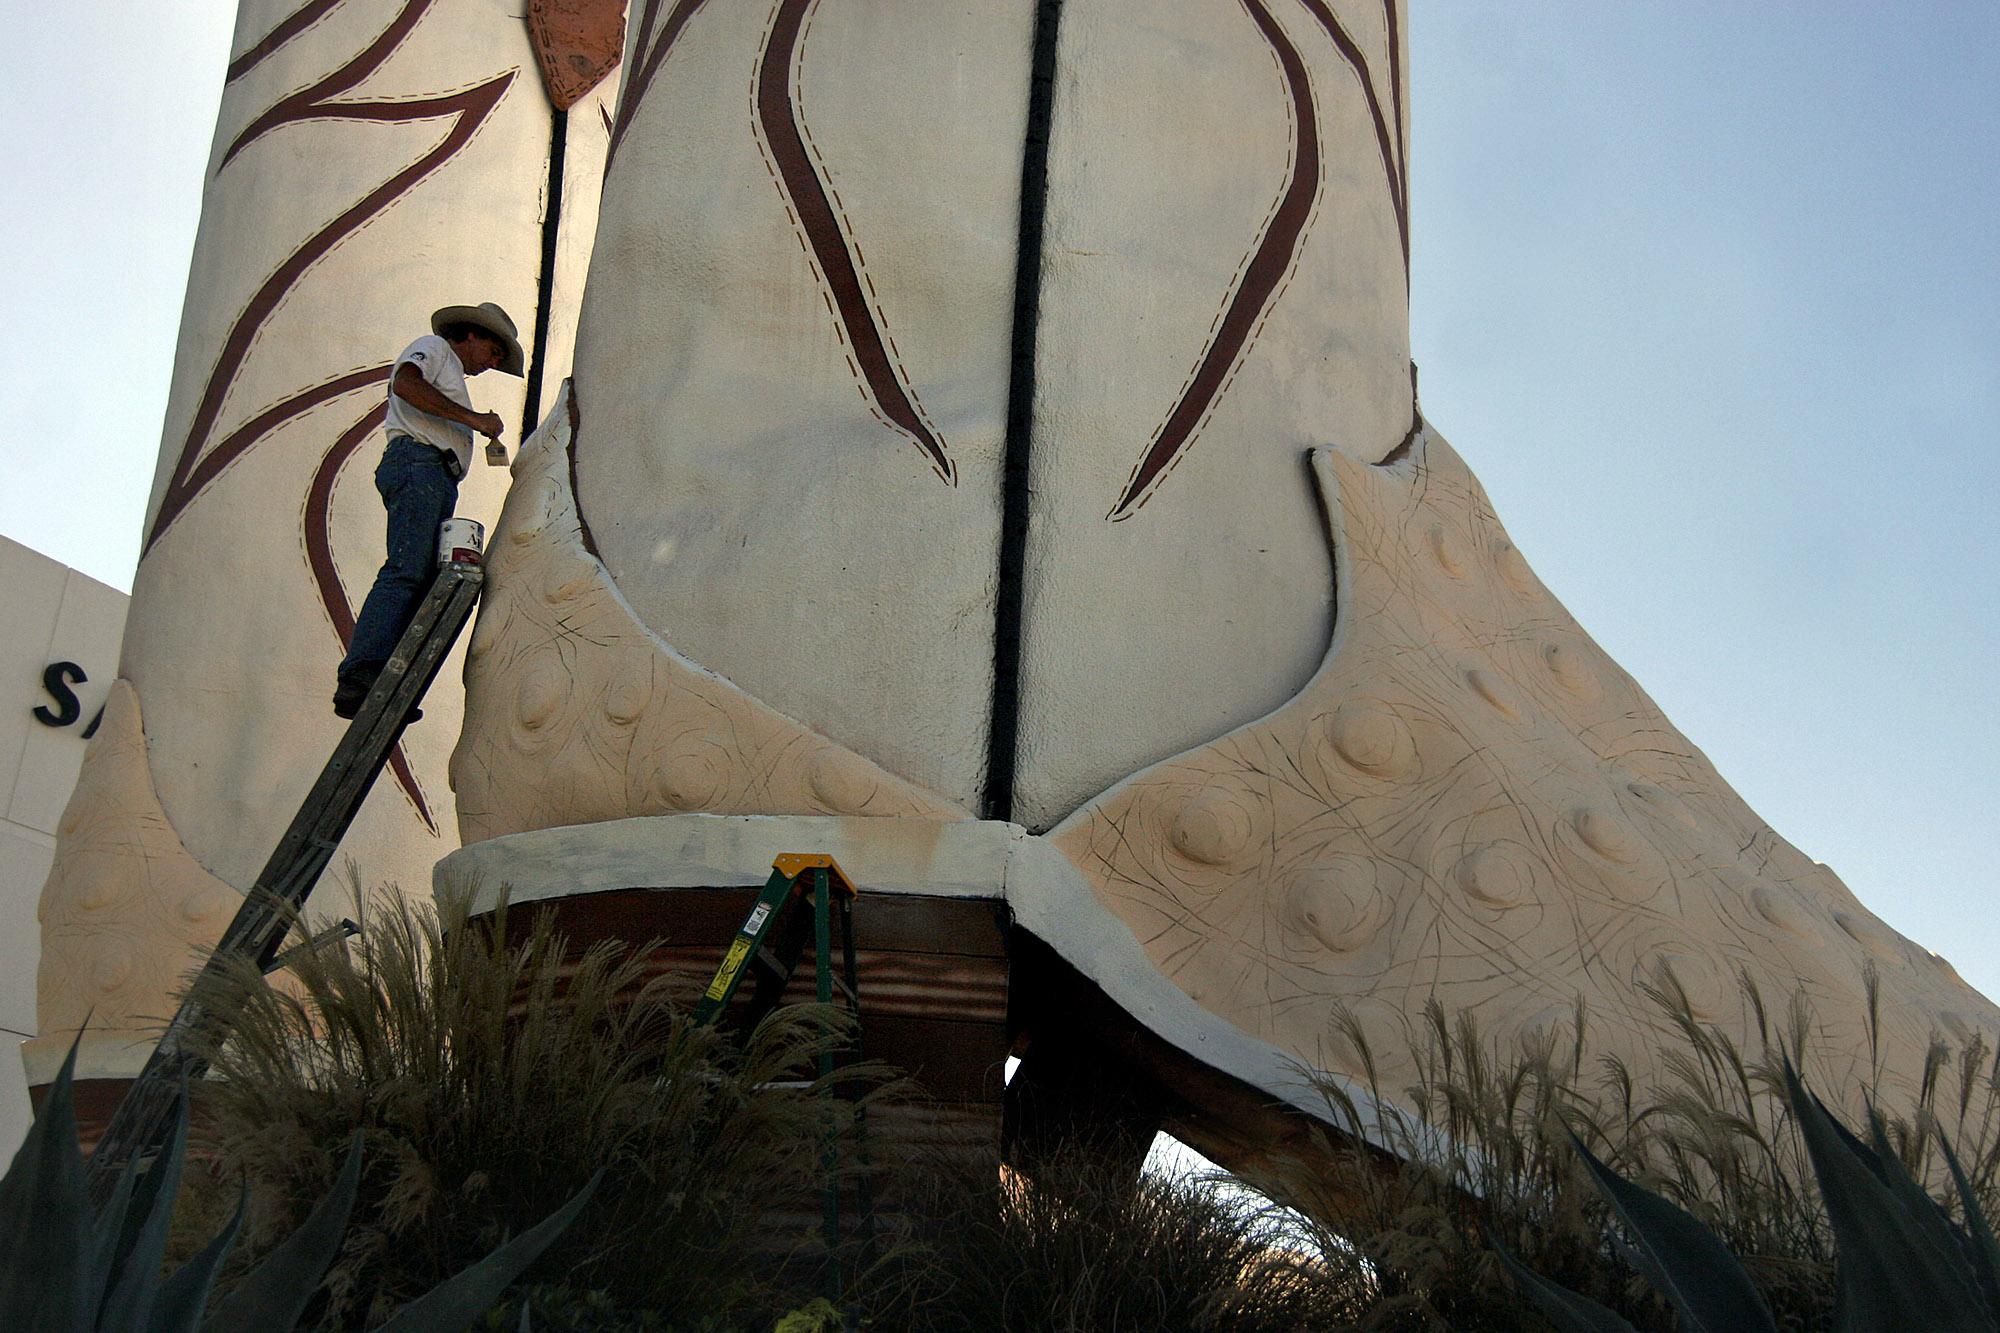 World's Largest Cowboy Boots Mark Their 40th Anniversary at North Star Mall, Arts Stories & Interviews, San Antonio